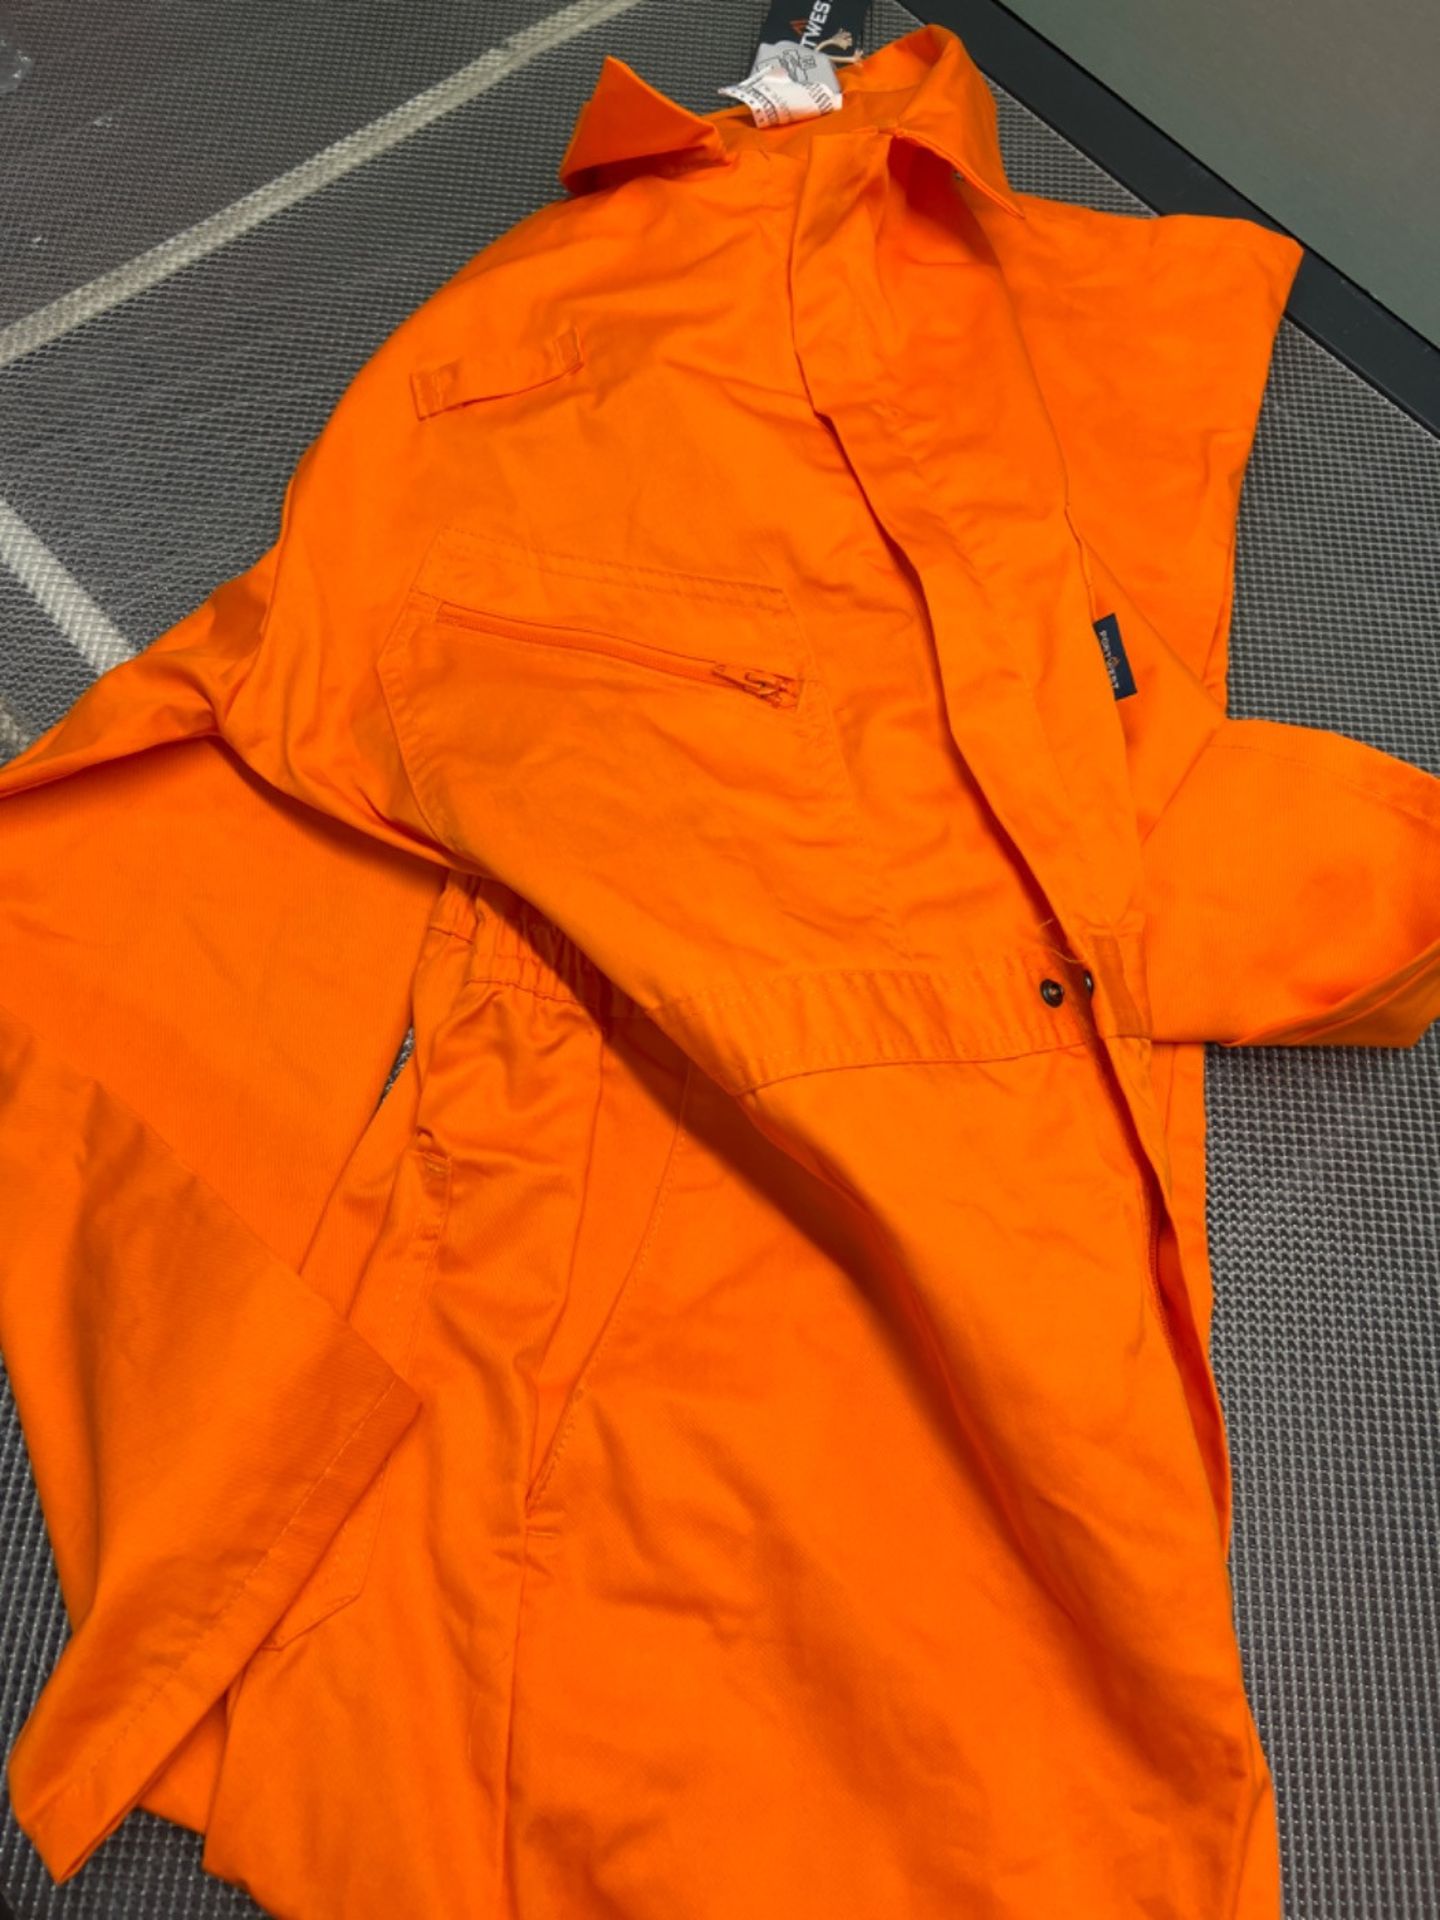 Portwest C813 Men's Liverpool Lightweight Safety Coverall Boiler Suit Overalls Orange, Large - Image 3 of 3